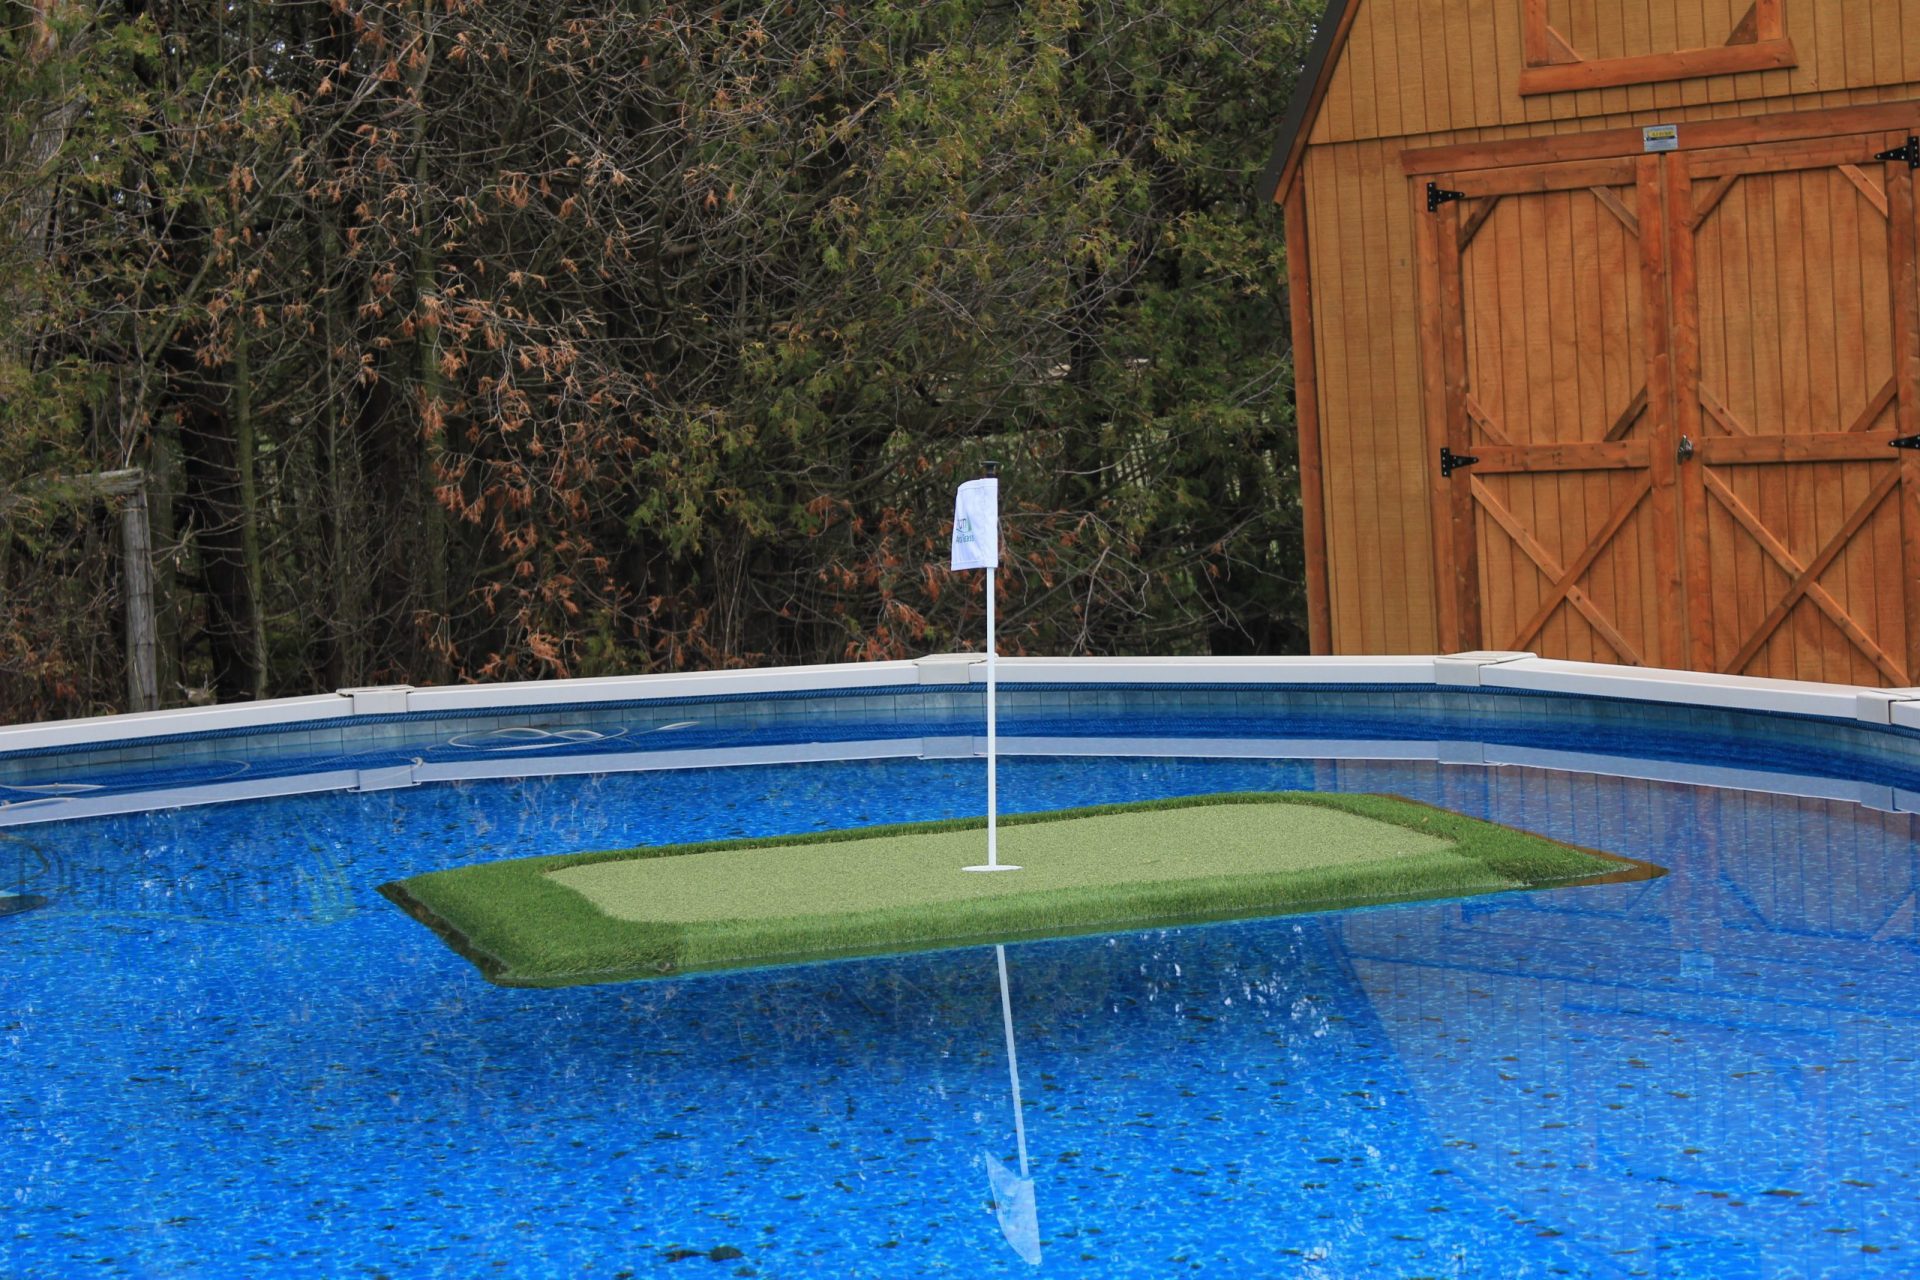 Home Floating Golf Green 800x500mm Golf Chipping Green Floating Pads  Swimming Pool Golf Pads Set Swimming Pool Golf Games Swimming Pool  Floating/water